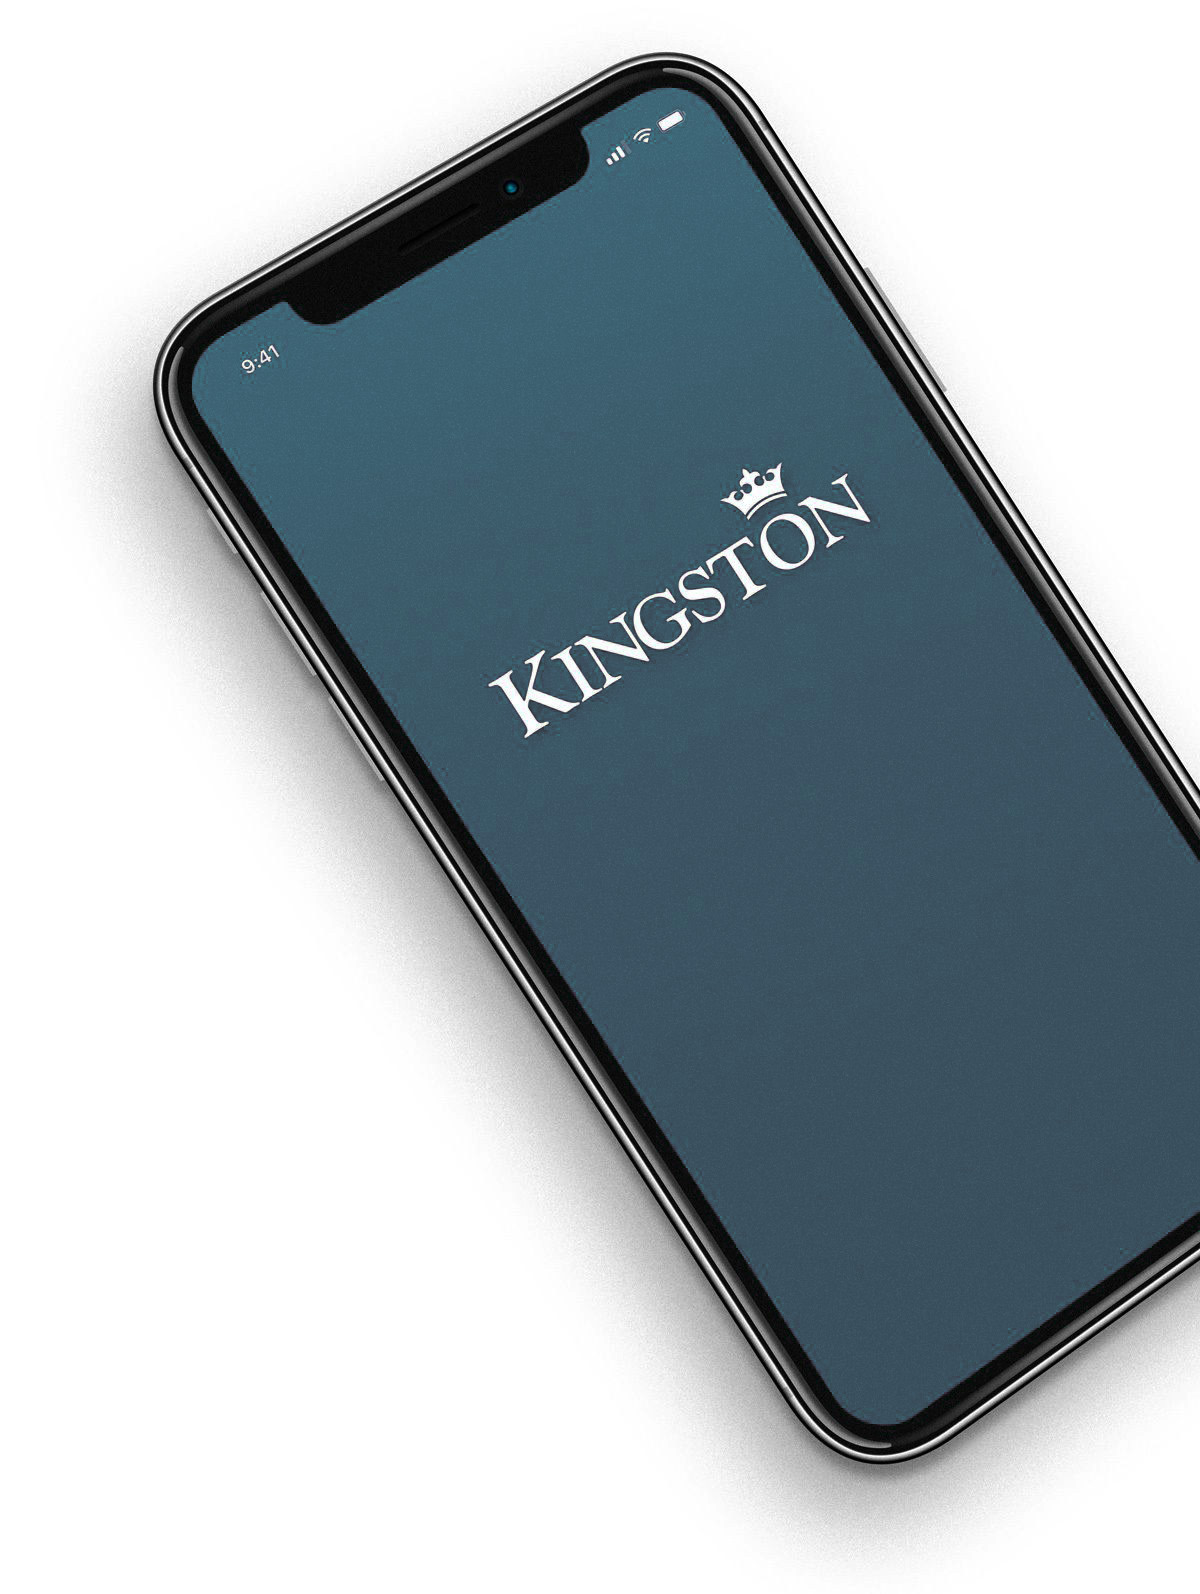 An image of a Kingston branded smart phone screen.